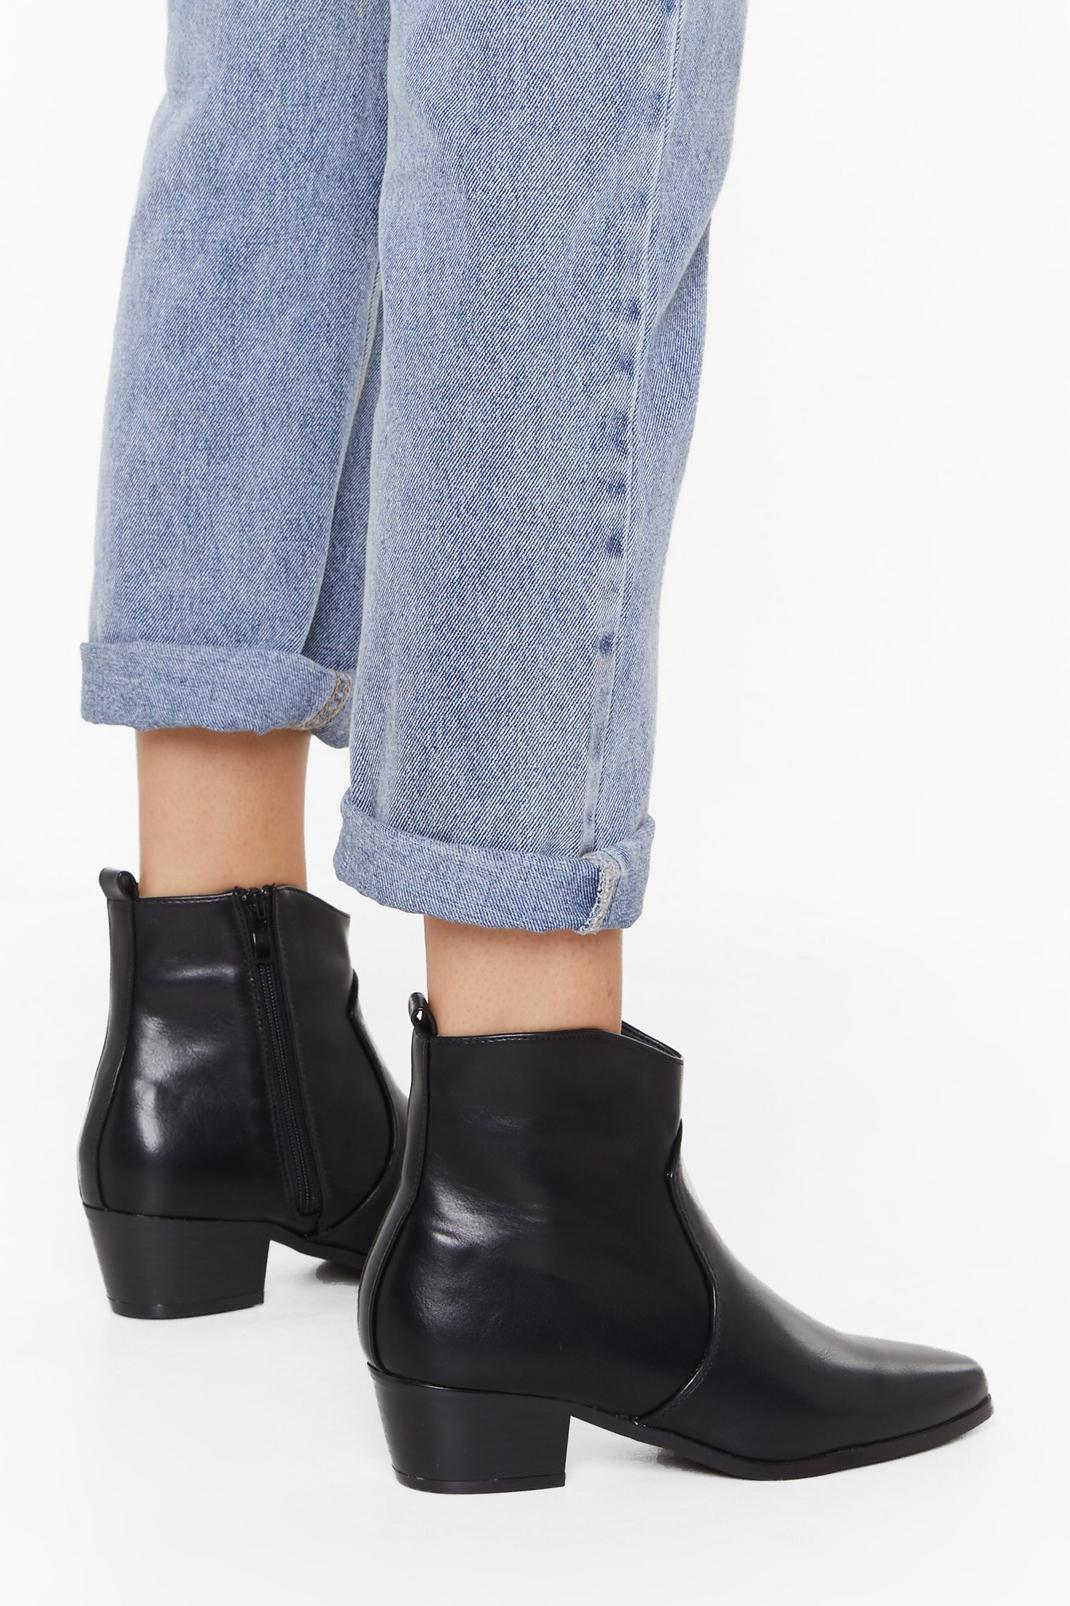 Walk This Way Faux Leather Boots | Nasty Gal